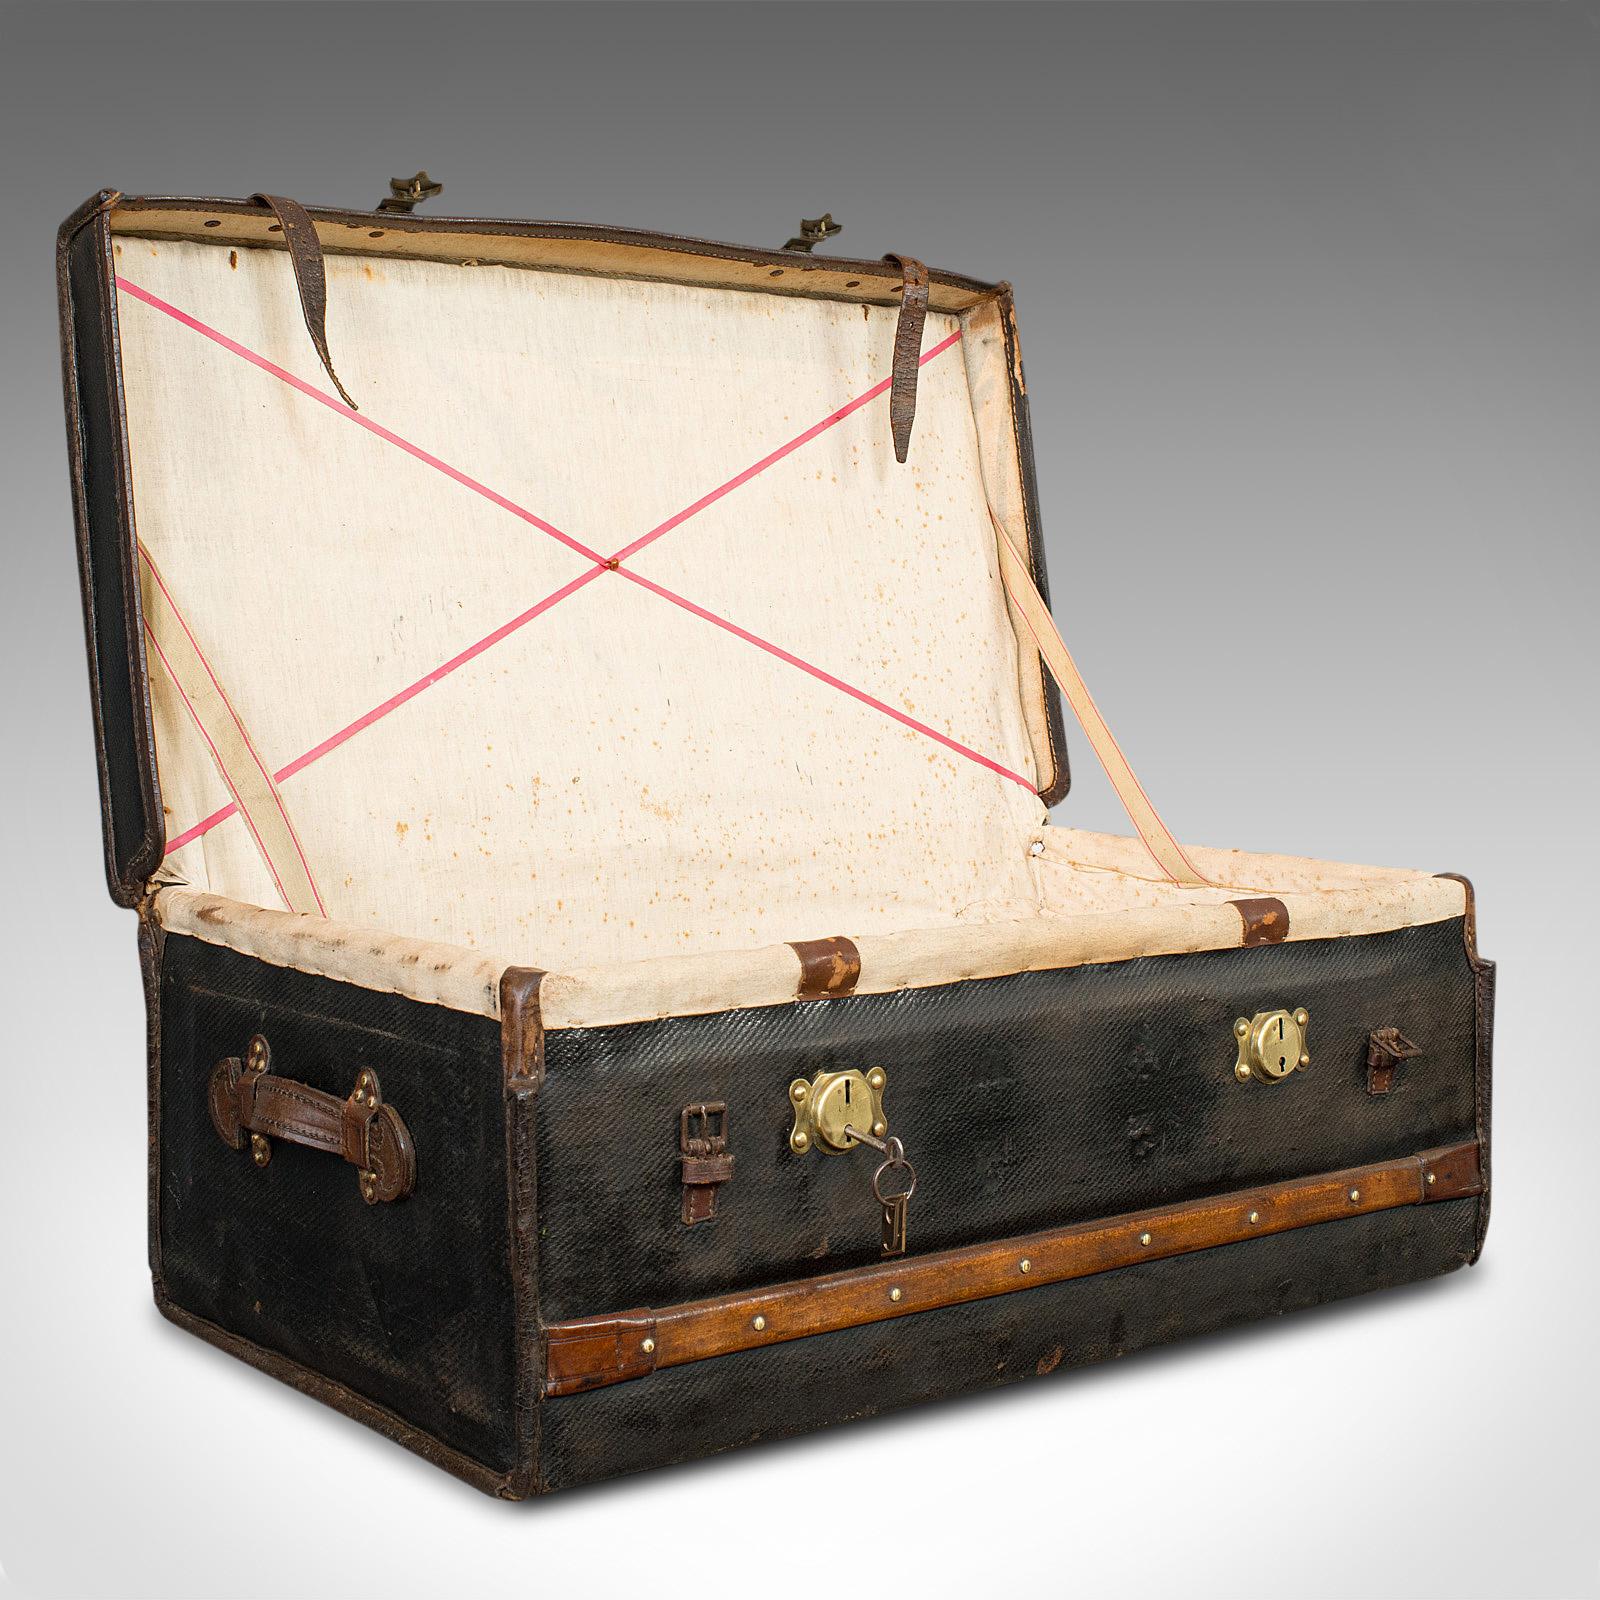 This is an antique captain's uniform travel case. An English, leather bound shipping suitcase, dating to the Victorian period circa 1890.

Attractive Victorian travel case
Displays a desirable aged patina
Canvas in consistent dark hues and good